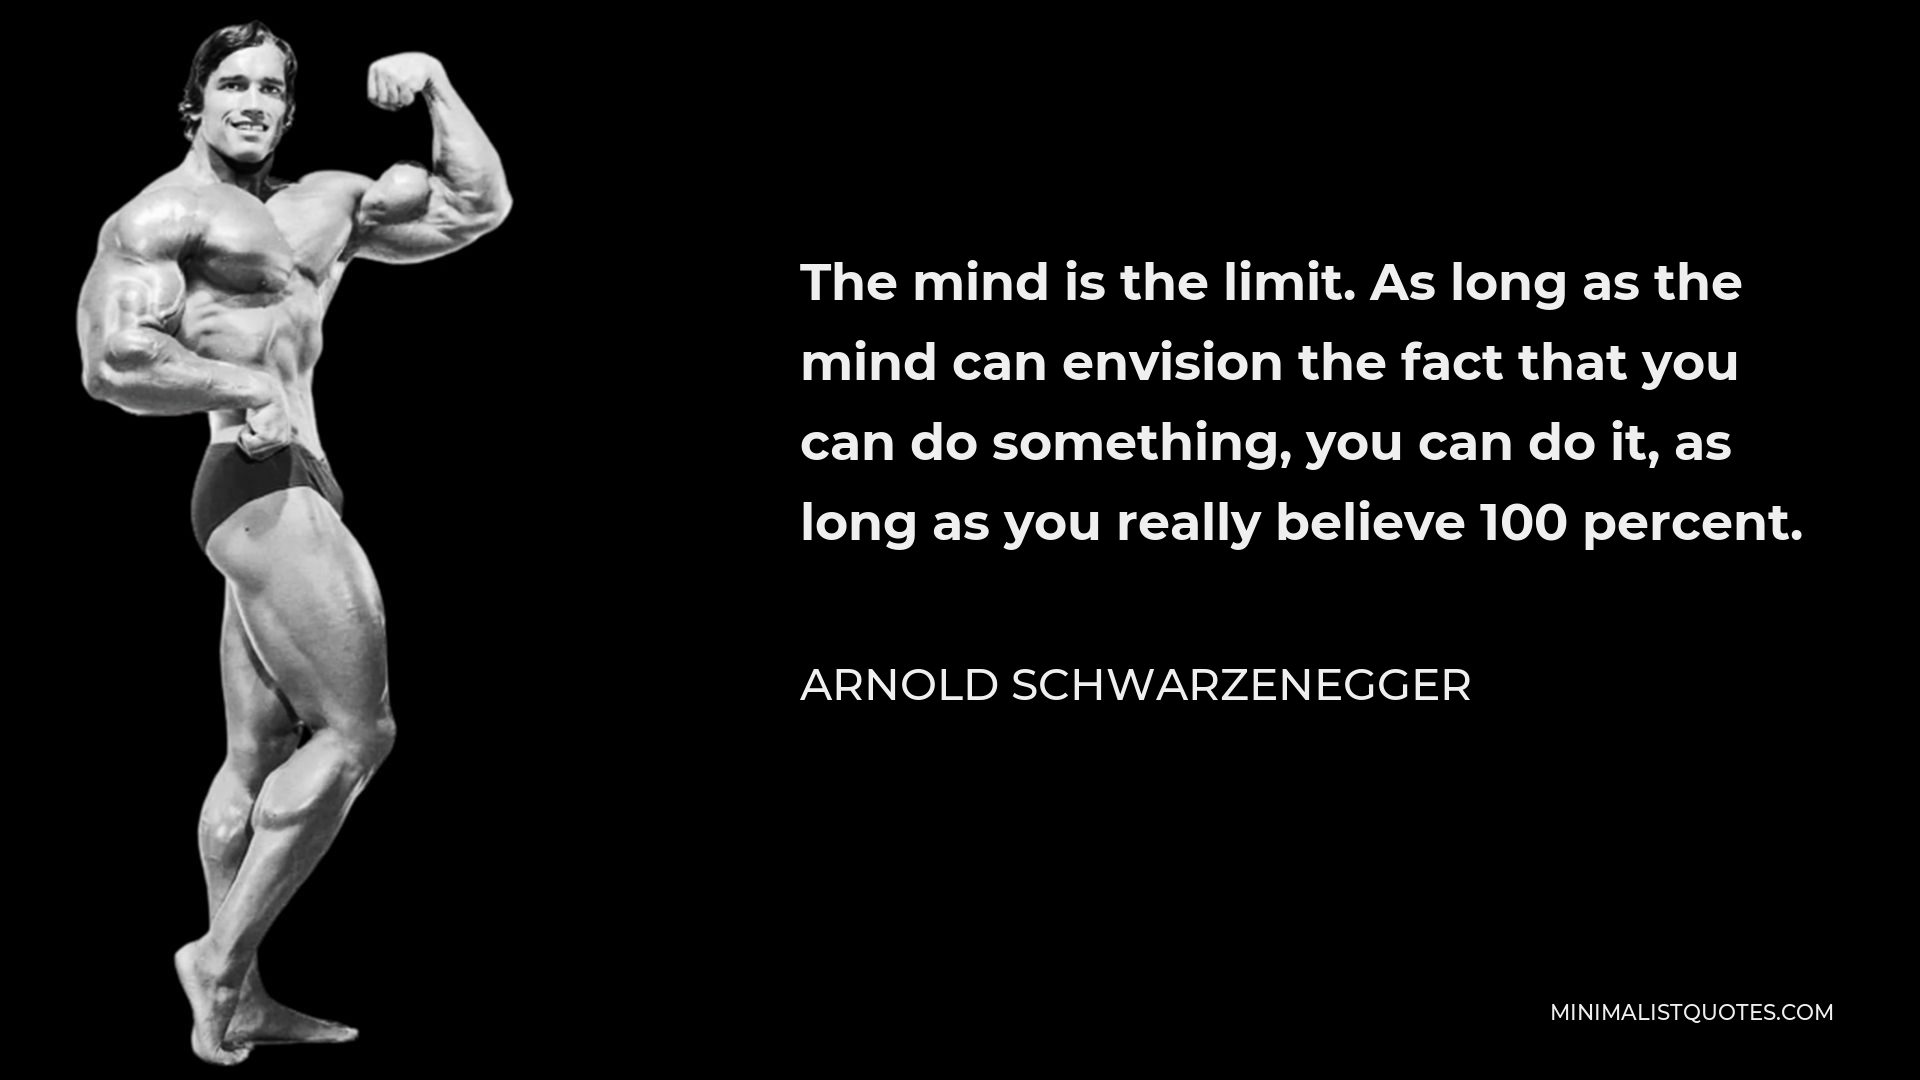 Arnold Schwarzenegger Quote - The mind is the limit. As long as the mind can envision the fact that you can do something, you can do it, as long as you really believe 100 percent.